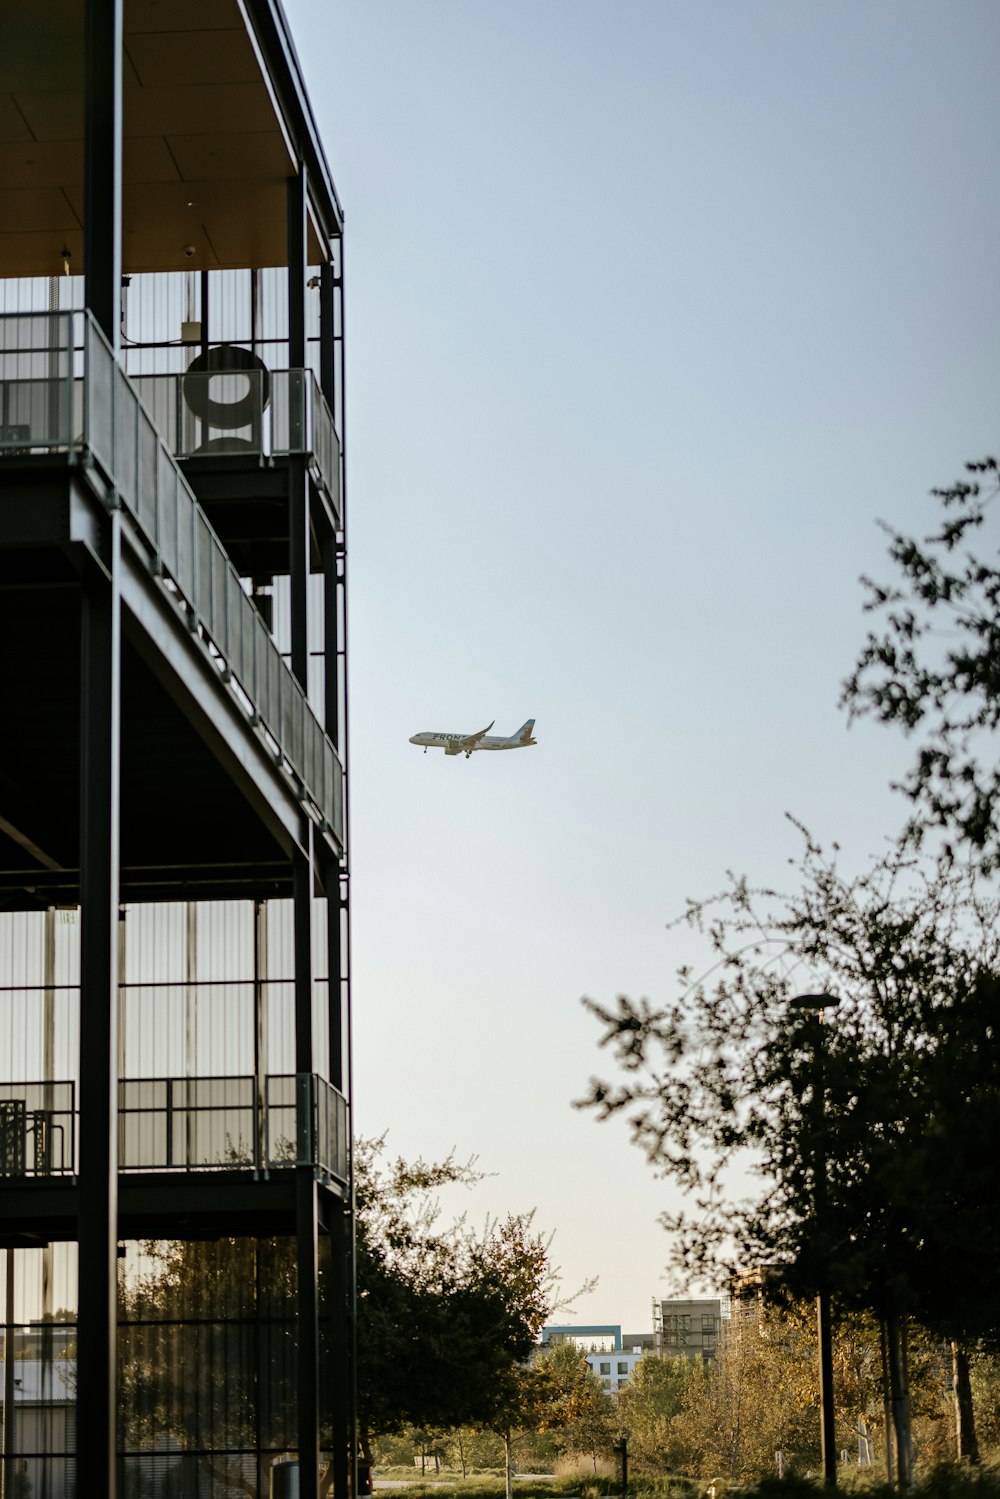 an airplane is flying over a building with balconies